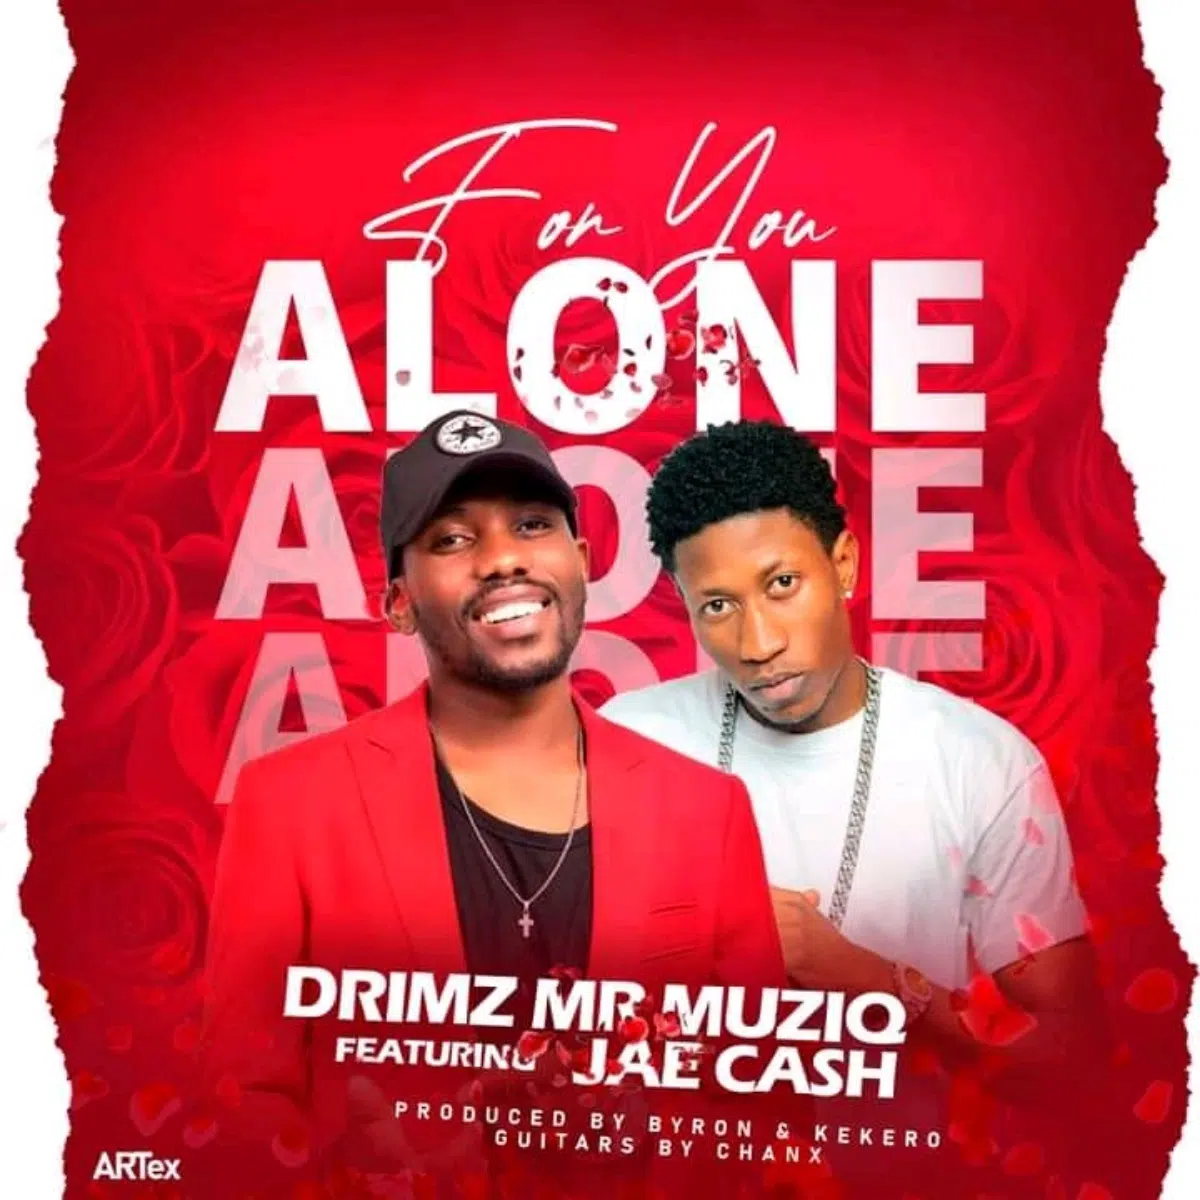 DOWNLOAD: Drimz Feat Jae Cash – “For You Alone” Mp3